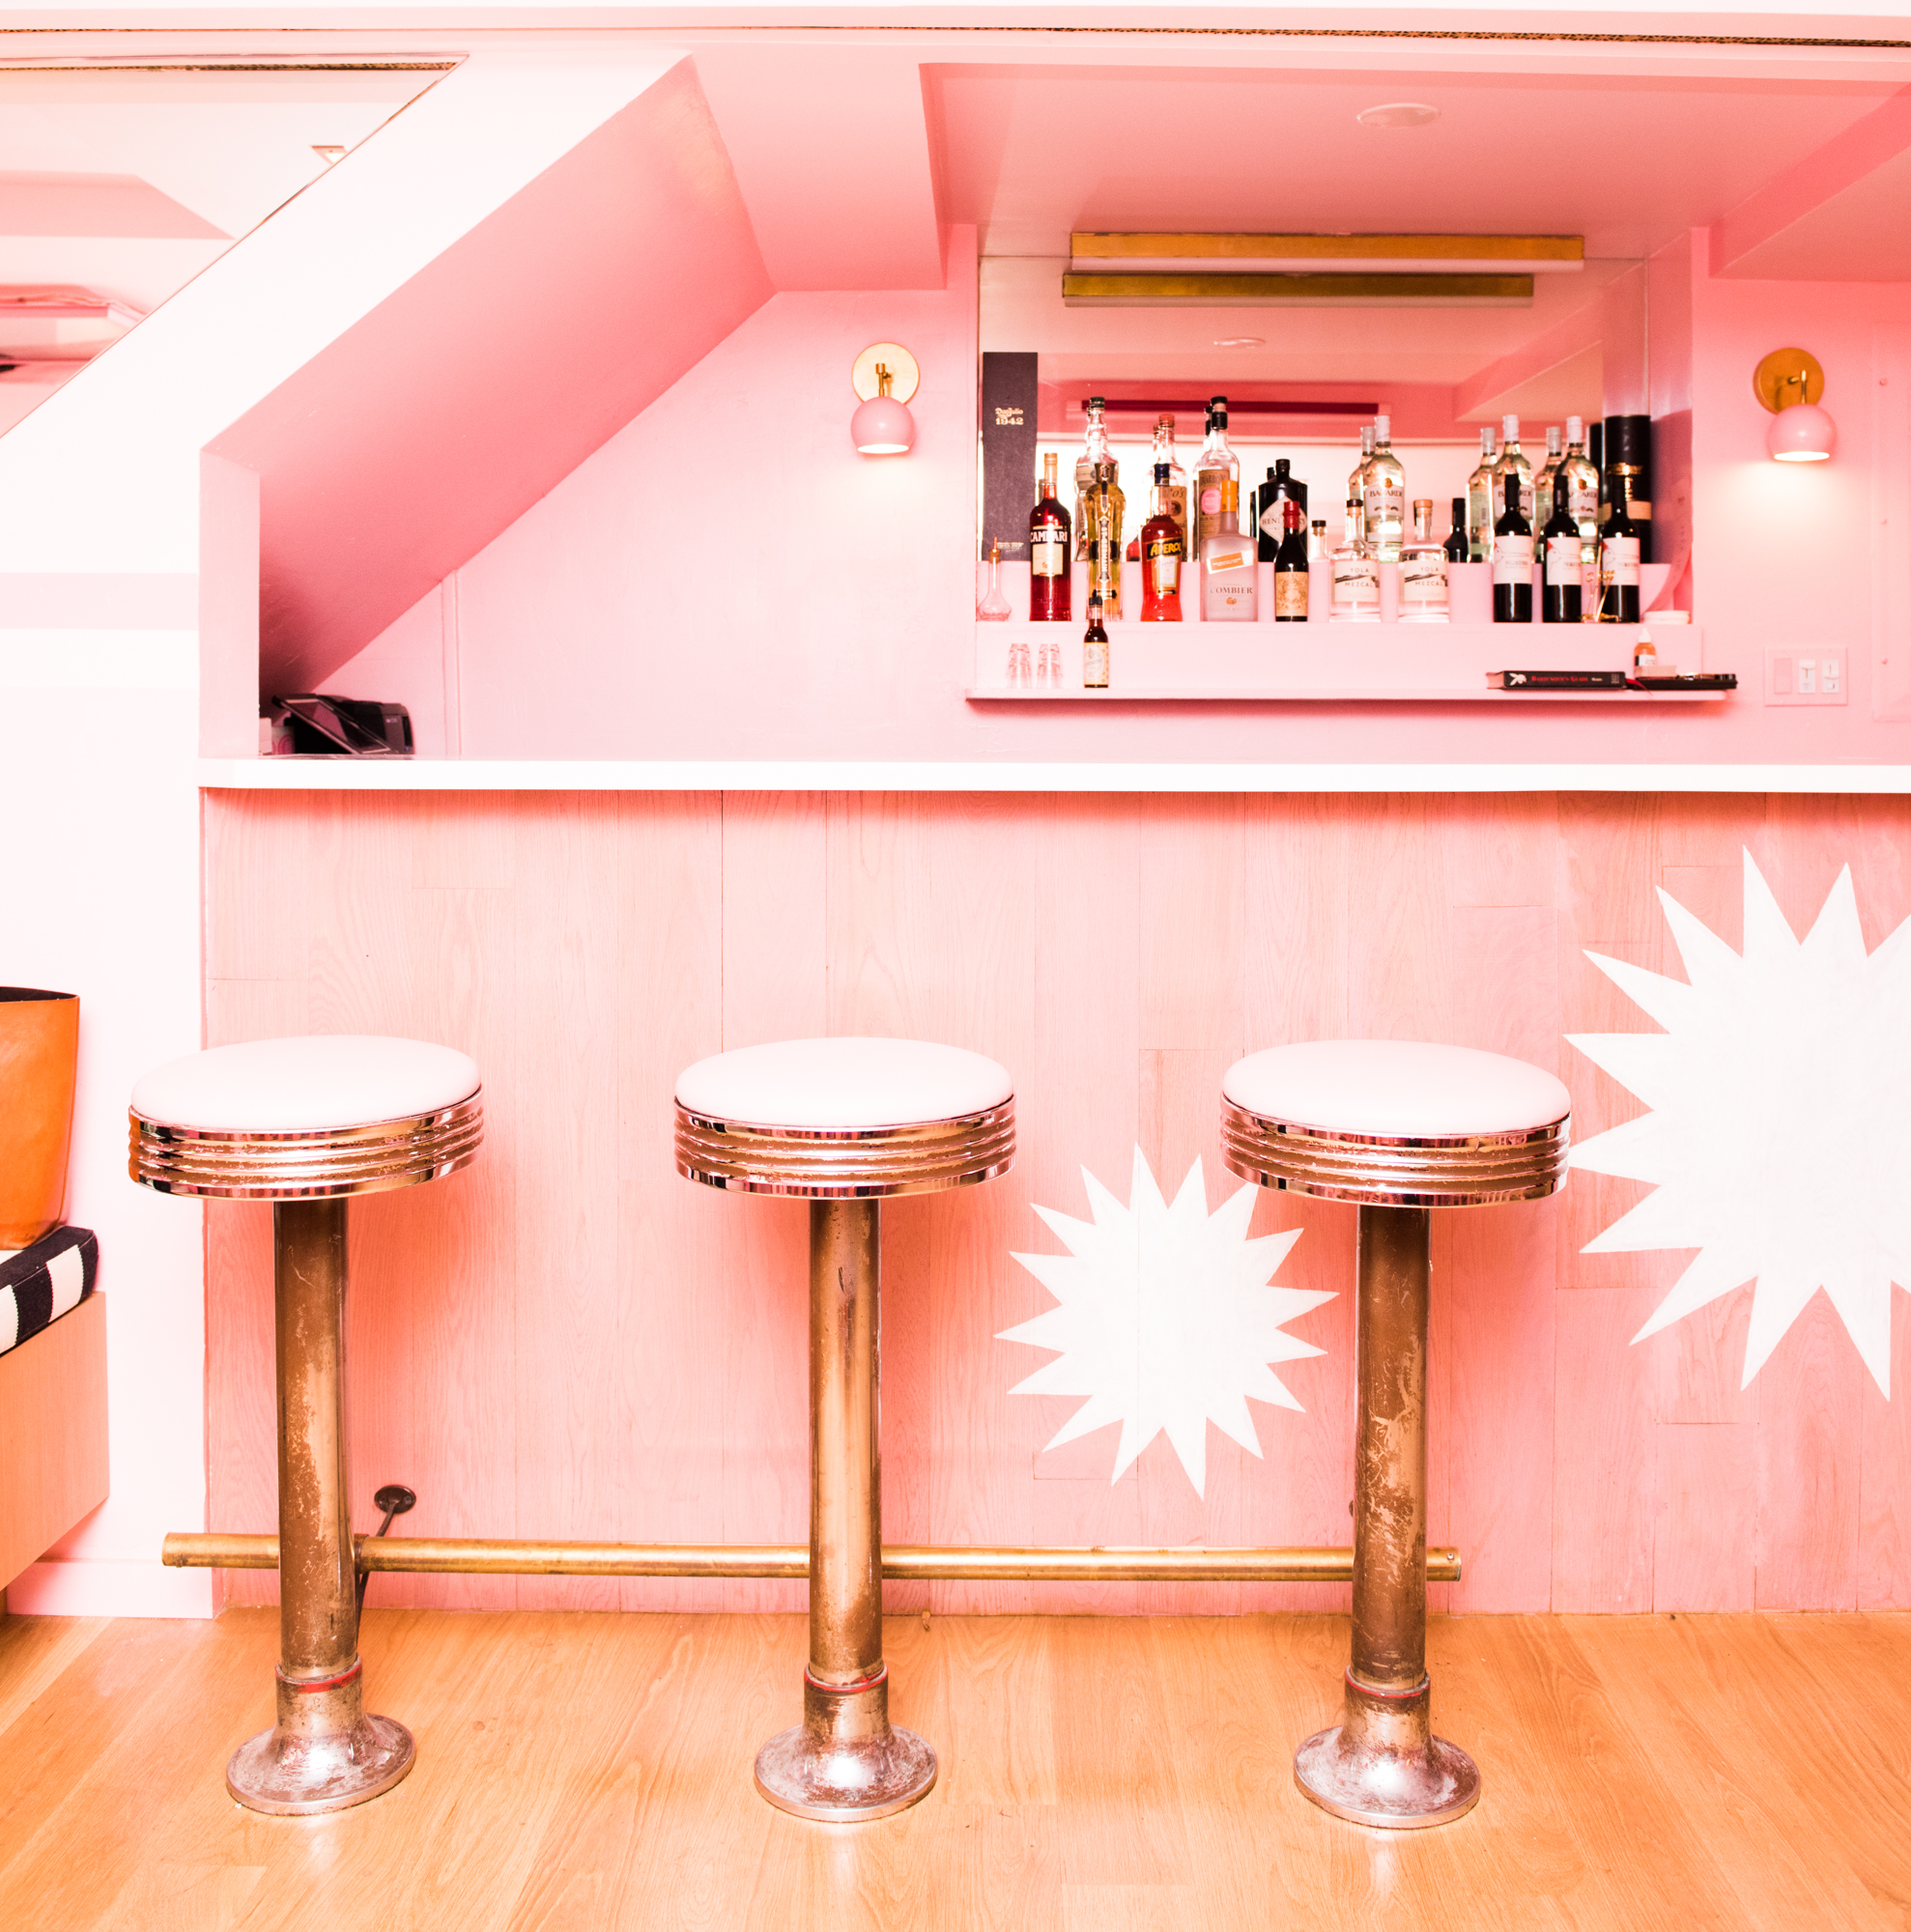 The bar at Pietro Nolita - ours is a strawberry dacquiri/Photo:&nbsp;Jake Rosenberg&nbsp;for The Coveteur